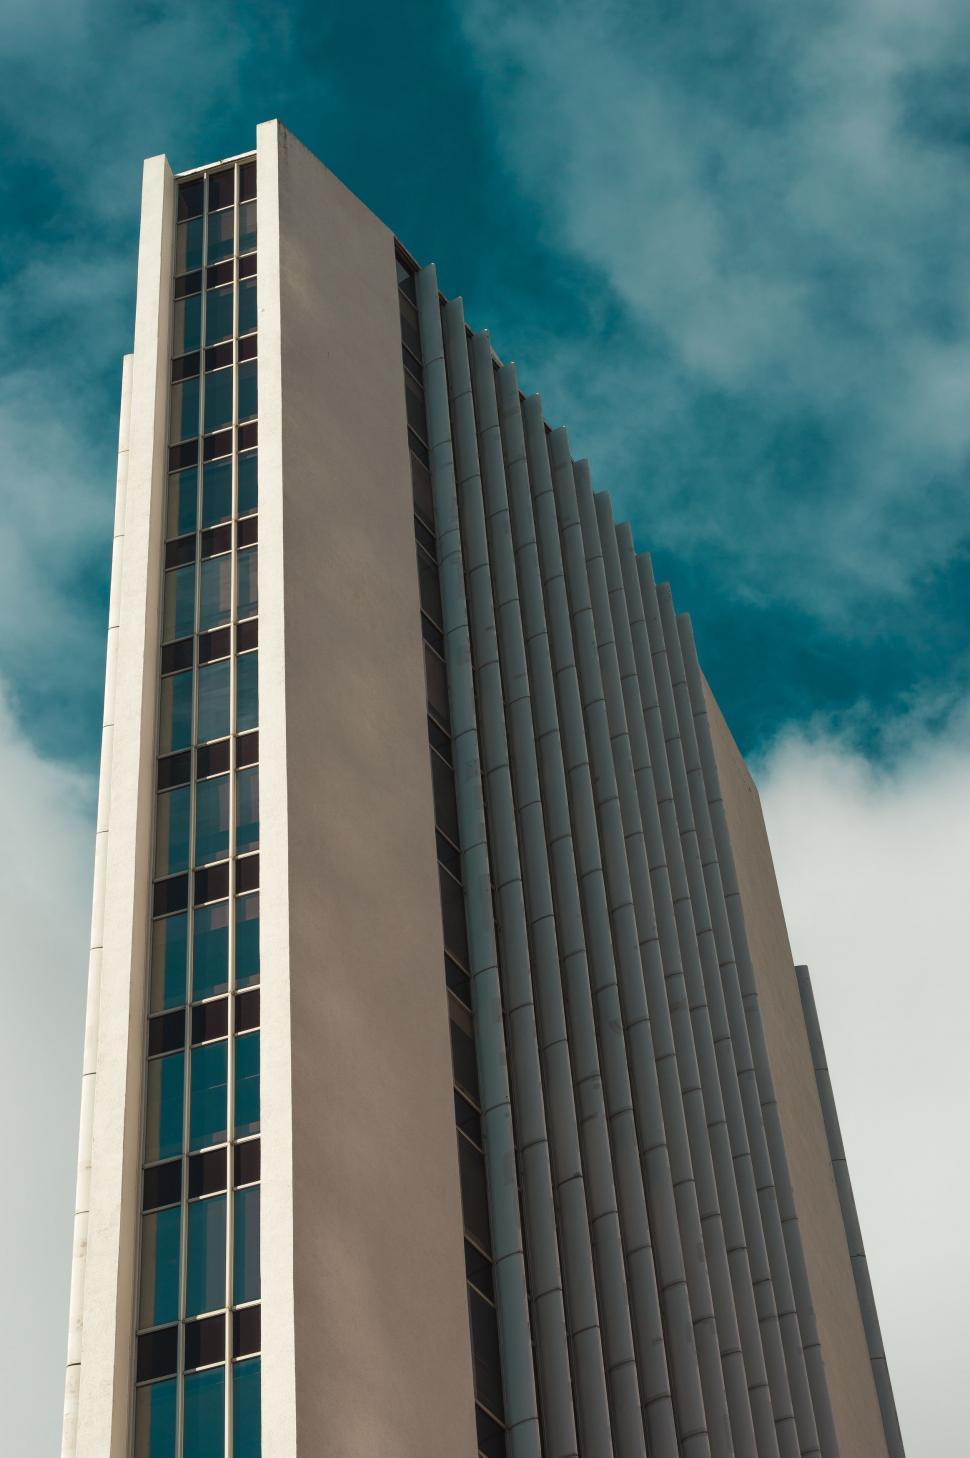 Free Image of Tall Building Against Sky Background 